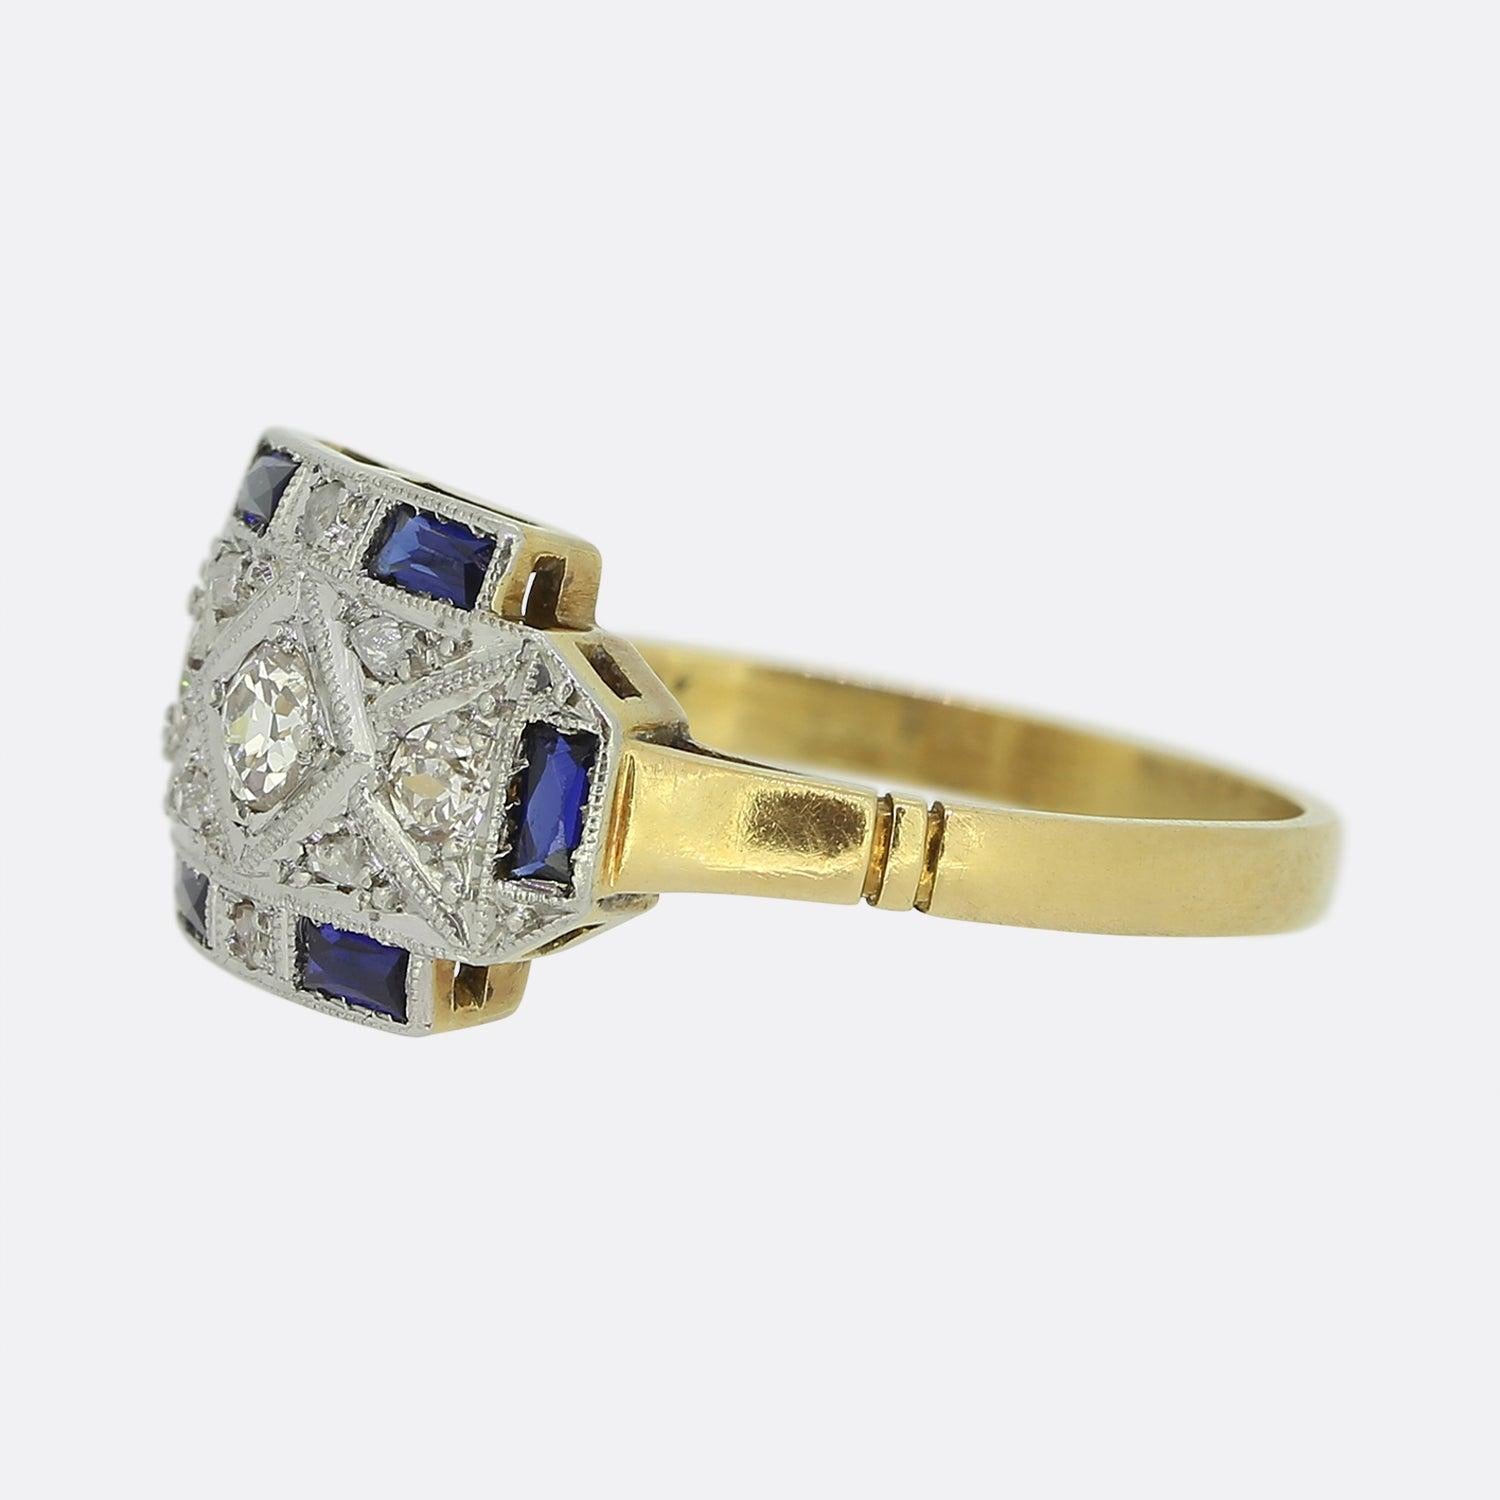 Here we have an original Art Deco sapphire and diamond ring. This piece is set with old and rose cut diamonds at the centre and bordered with rectangular calibre cut blue sapphires. The band has been crafted in 18ct yellow gold with a platinum